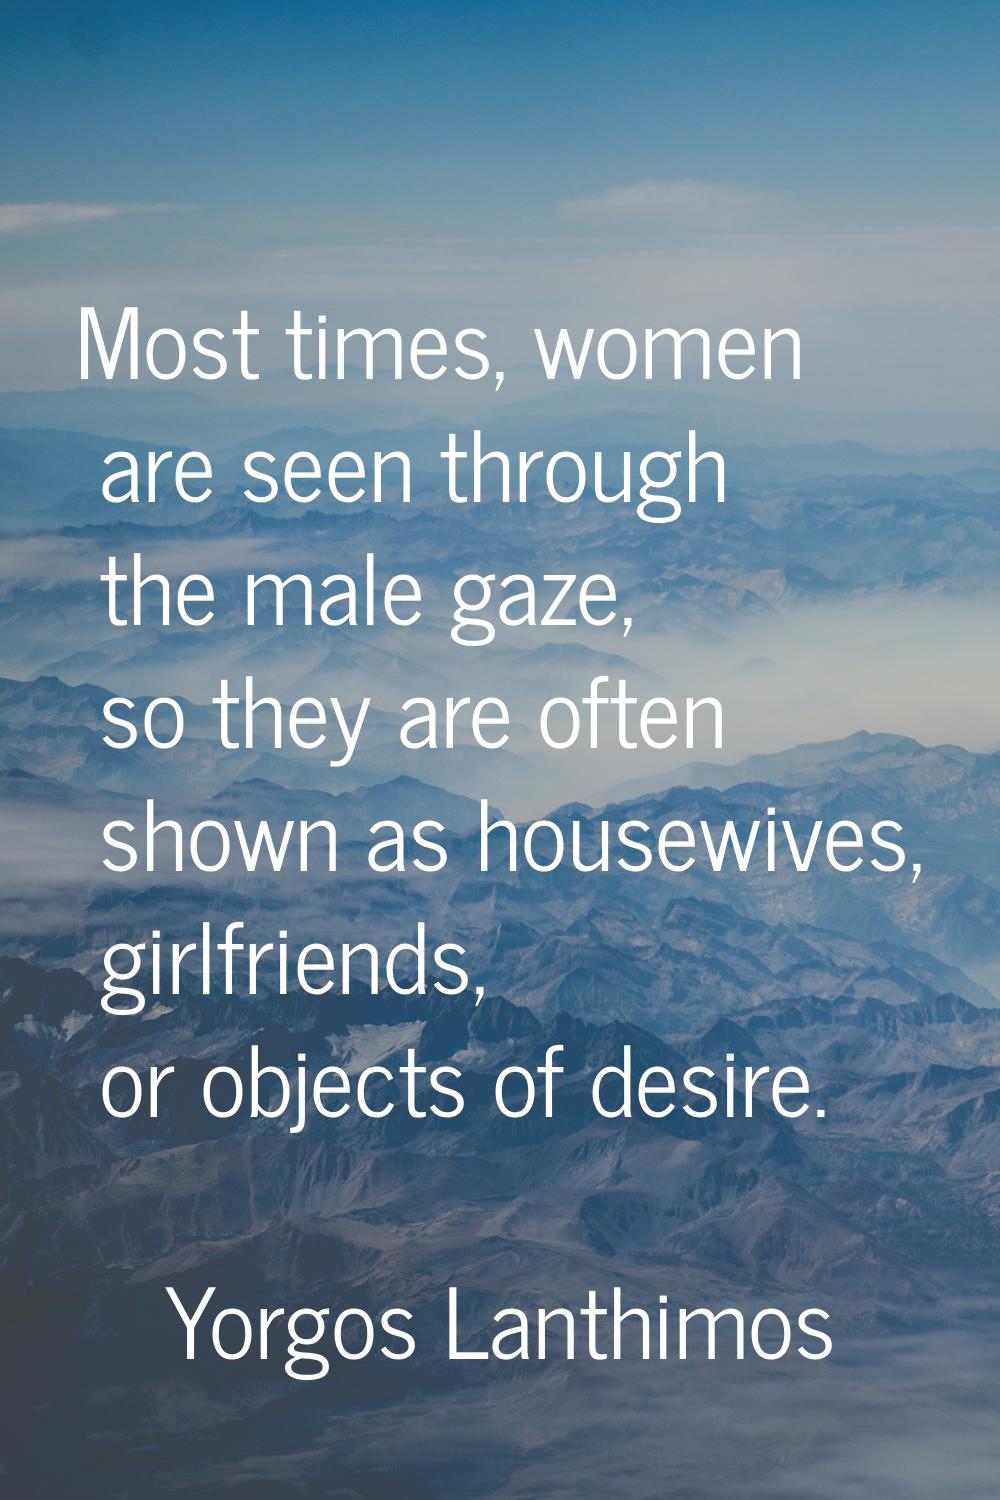 Most times, women are seen through the male gaze, so they are often shown as housewives, girlfriend